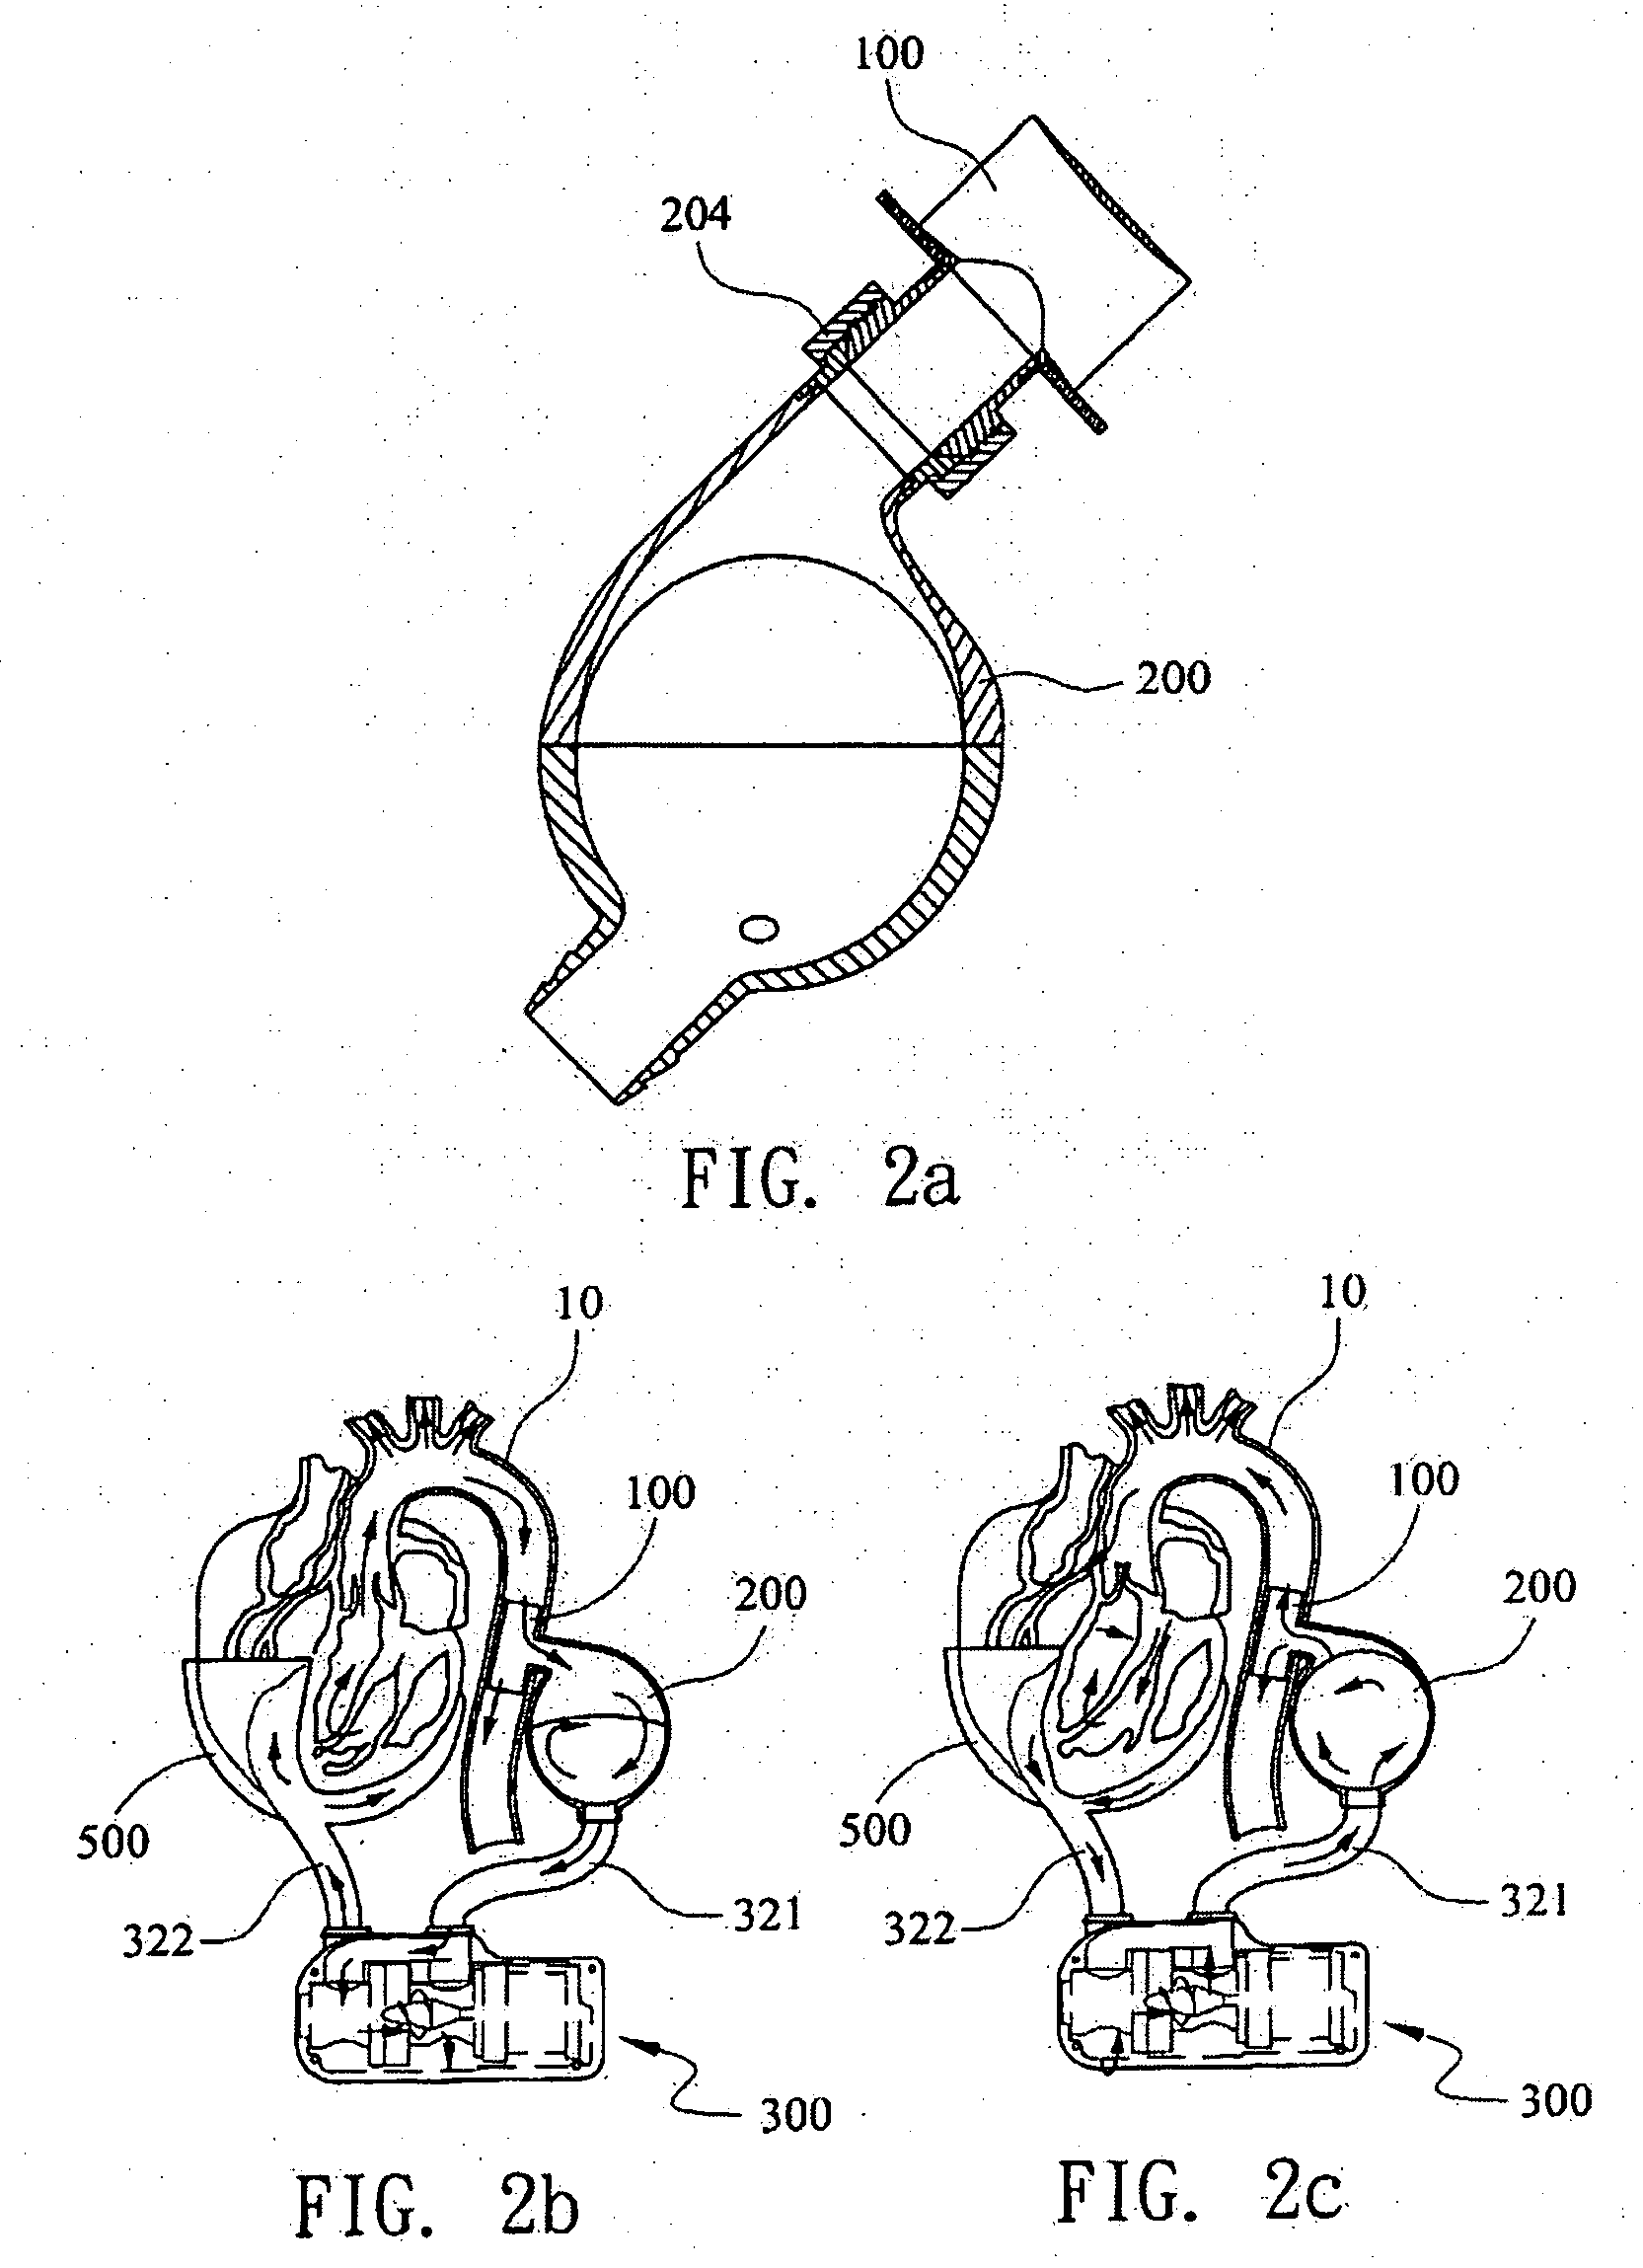 Ventricular Assist Device